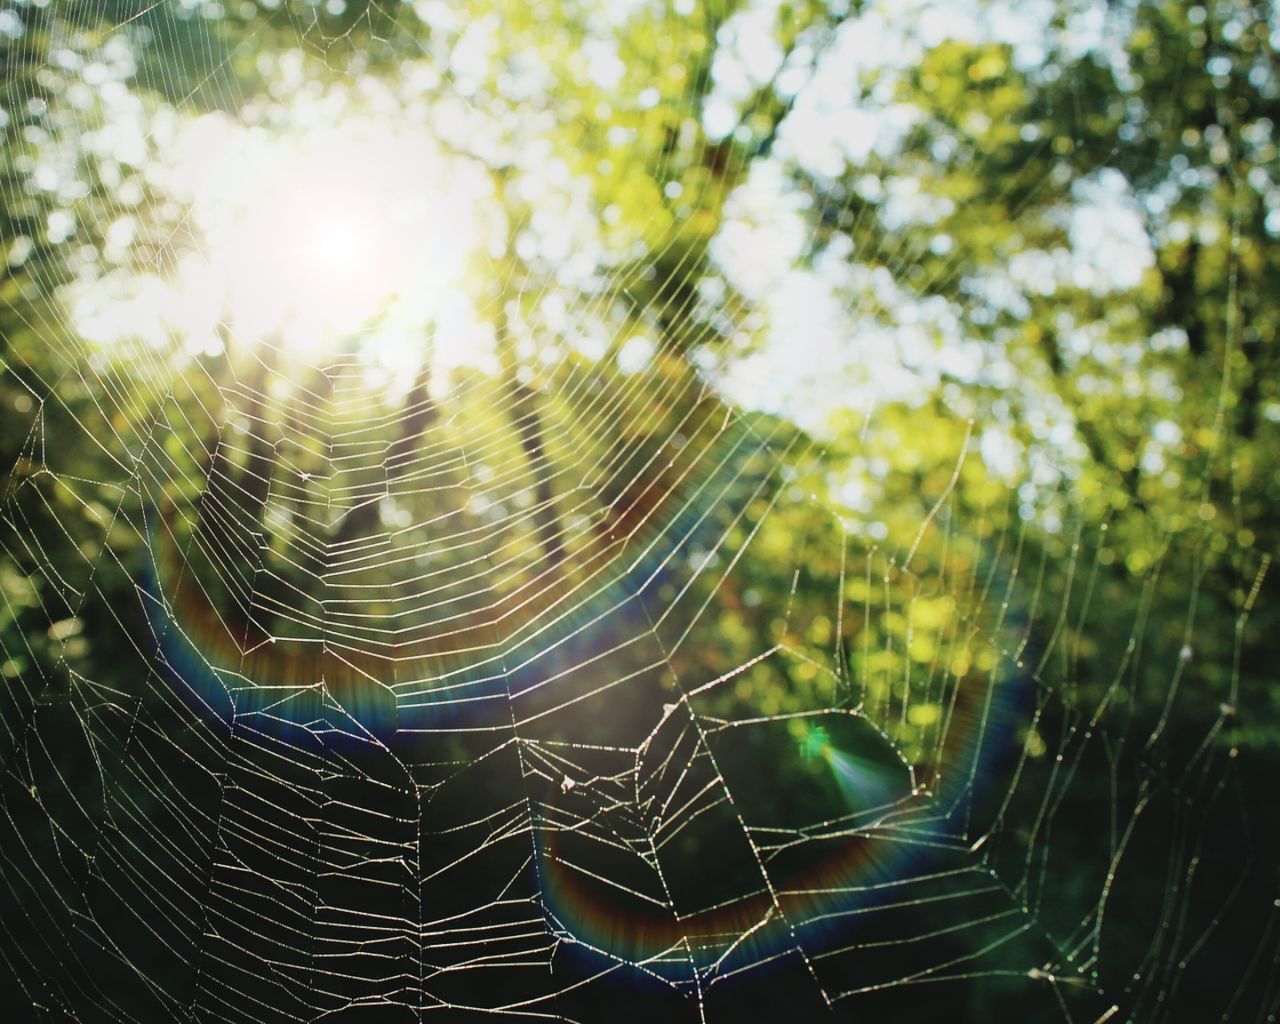 CLOSE-UP OF SPIDER WEB AGAINST TREES